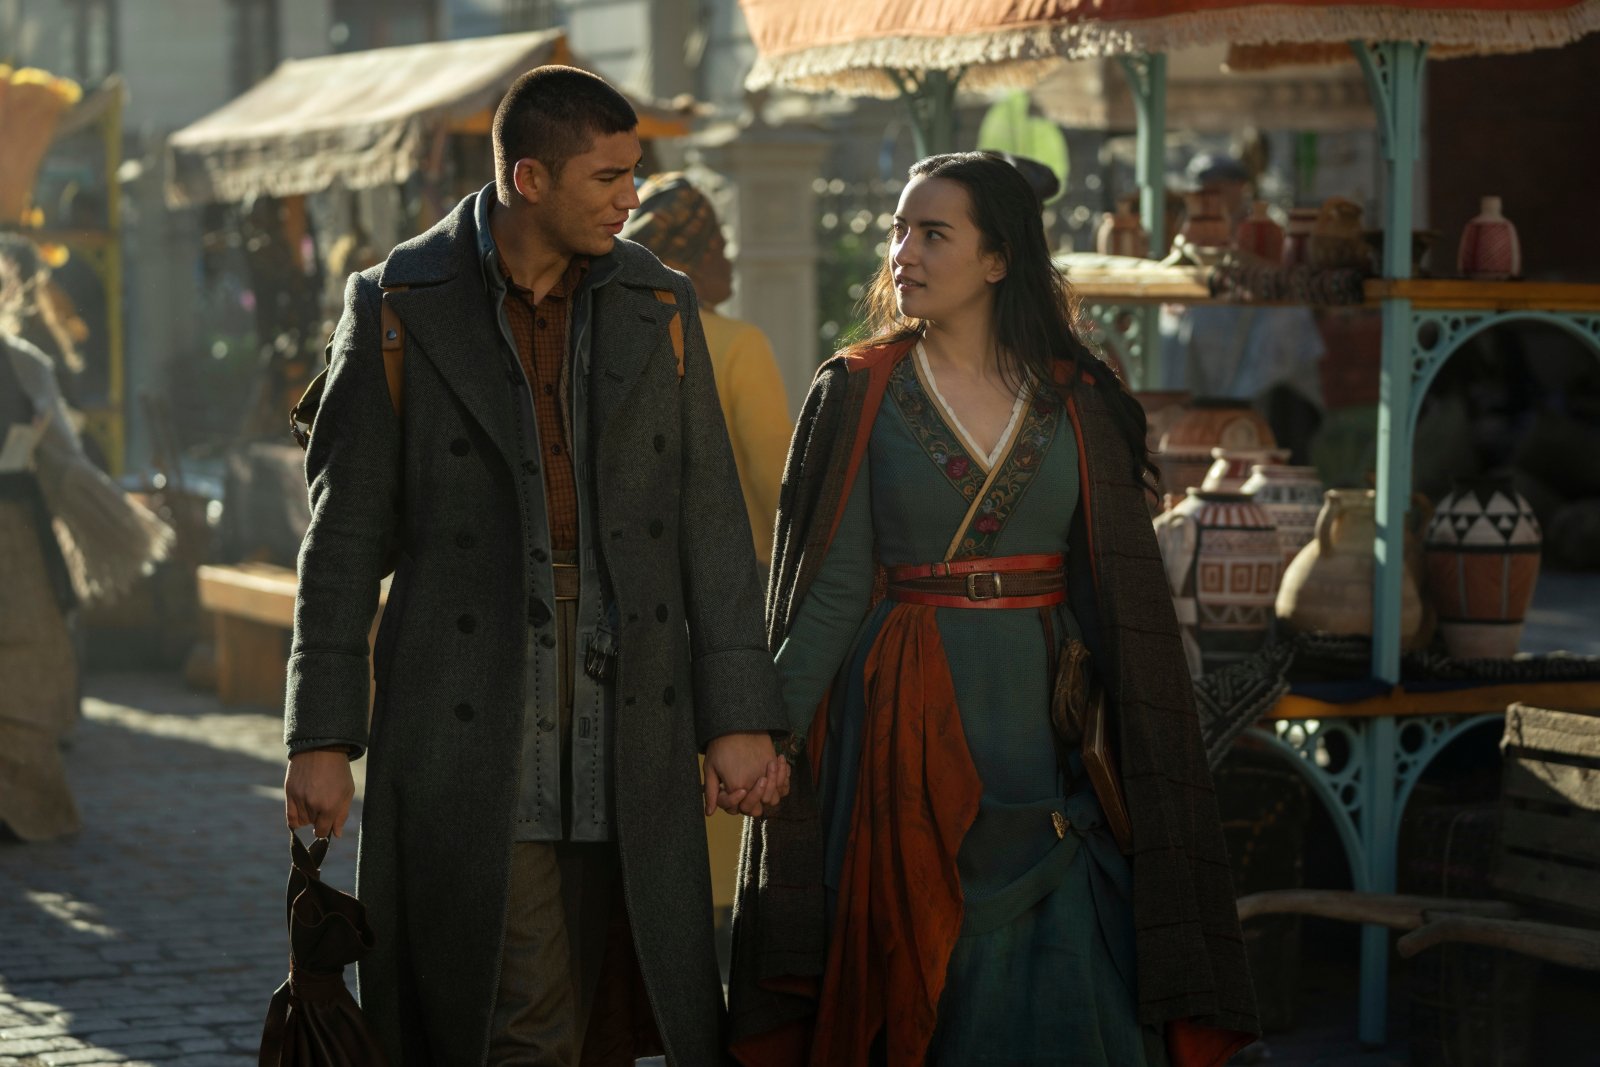 Archie Renaux and Jessie Mei Li as Mal and Alina in 'Shadow and Bone' Season 2 for our article about fantasy shows coming in 2023. They're walking side by side and holding hands.